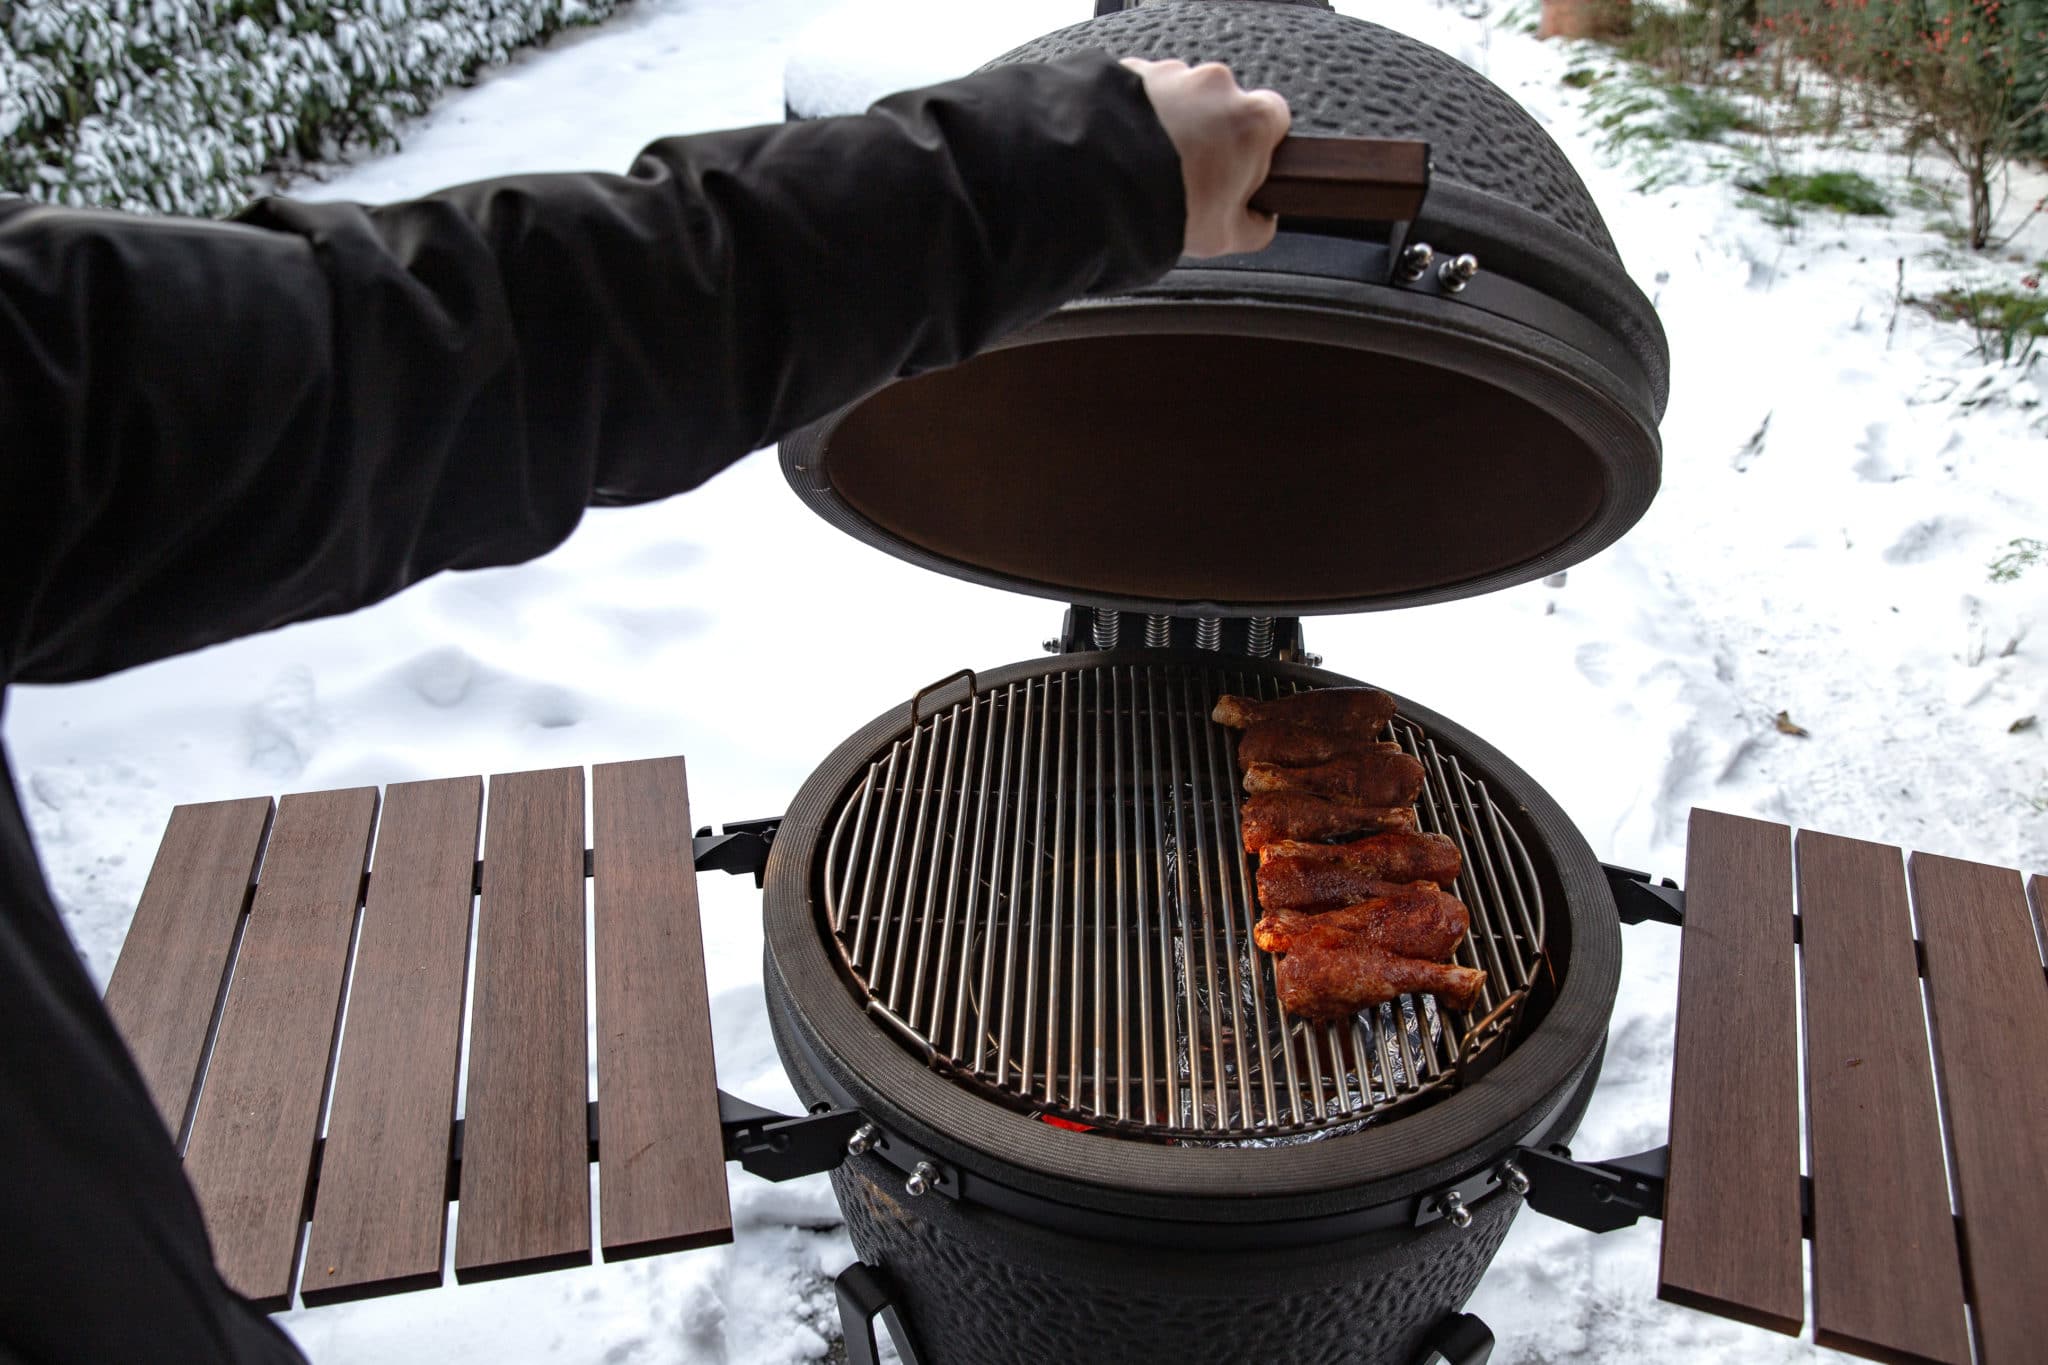 Tips to BBQ in Winter